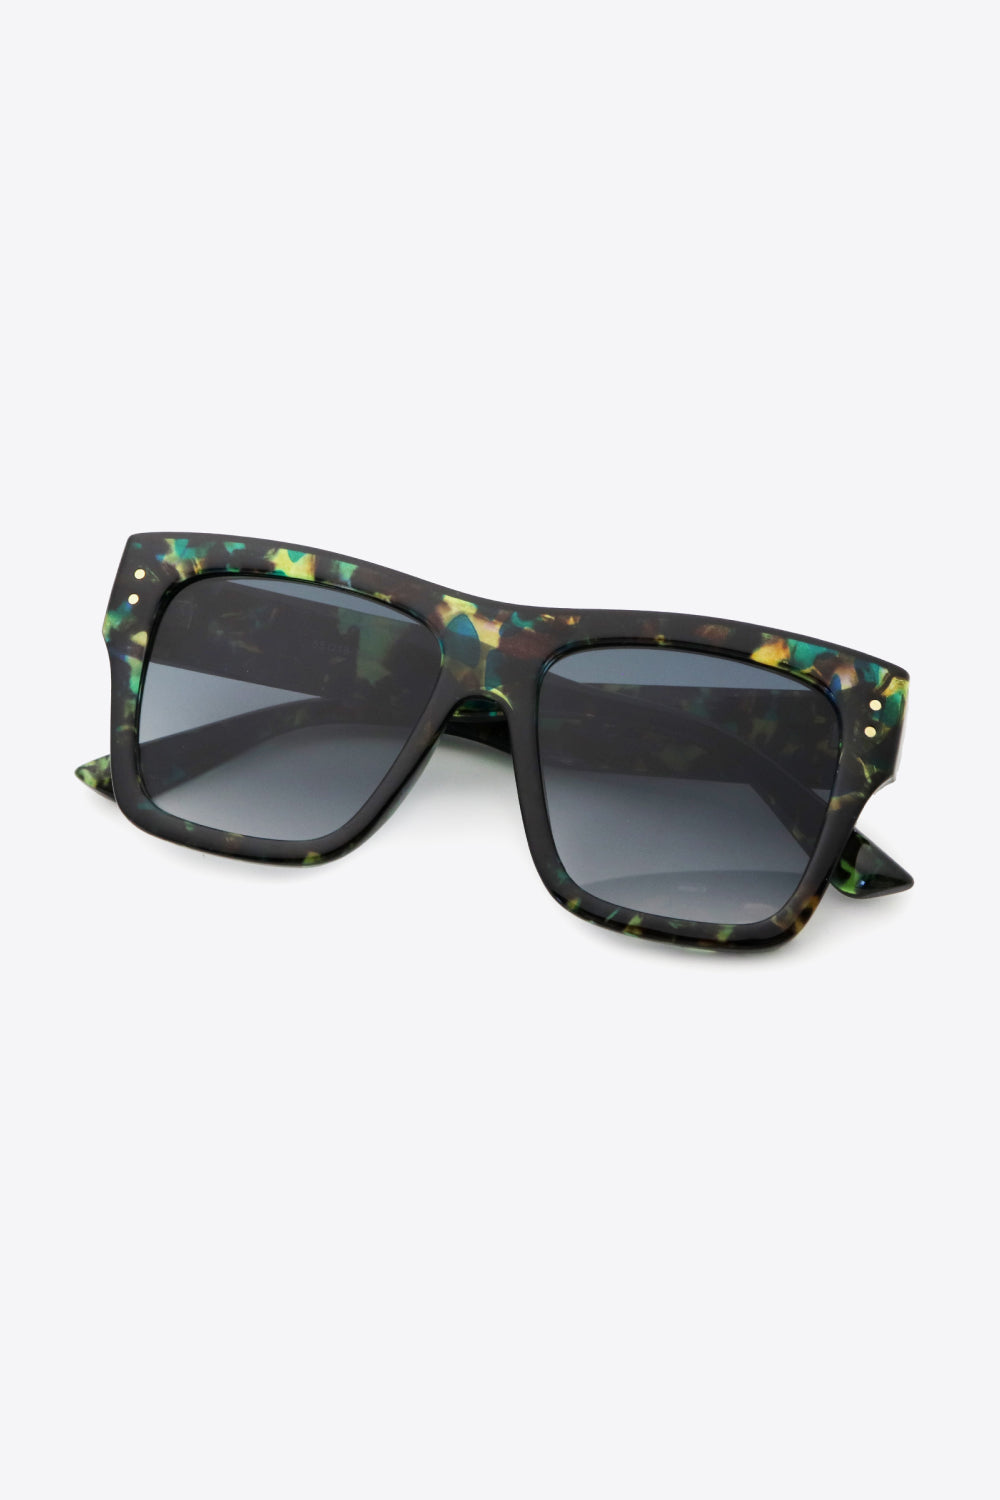 UV400 Patterned Polycarbonate Square Sunglasses Print on any thing USA/STOD clothes